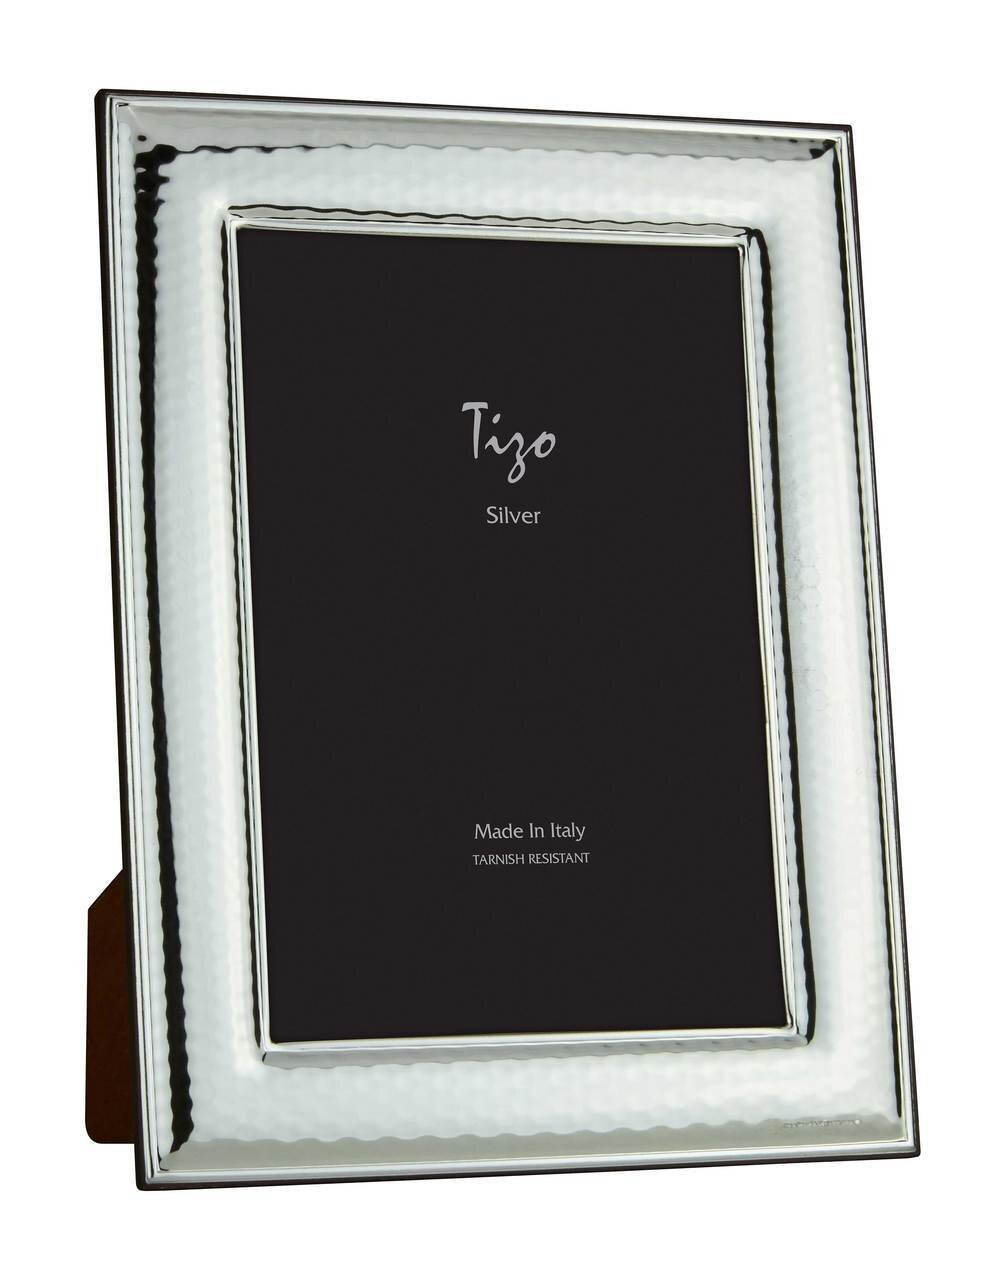 Tizo 4 x 6 Inch Hammer Site Silverplated Picture Frame 1101-46